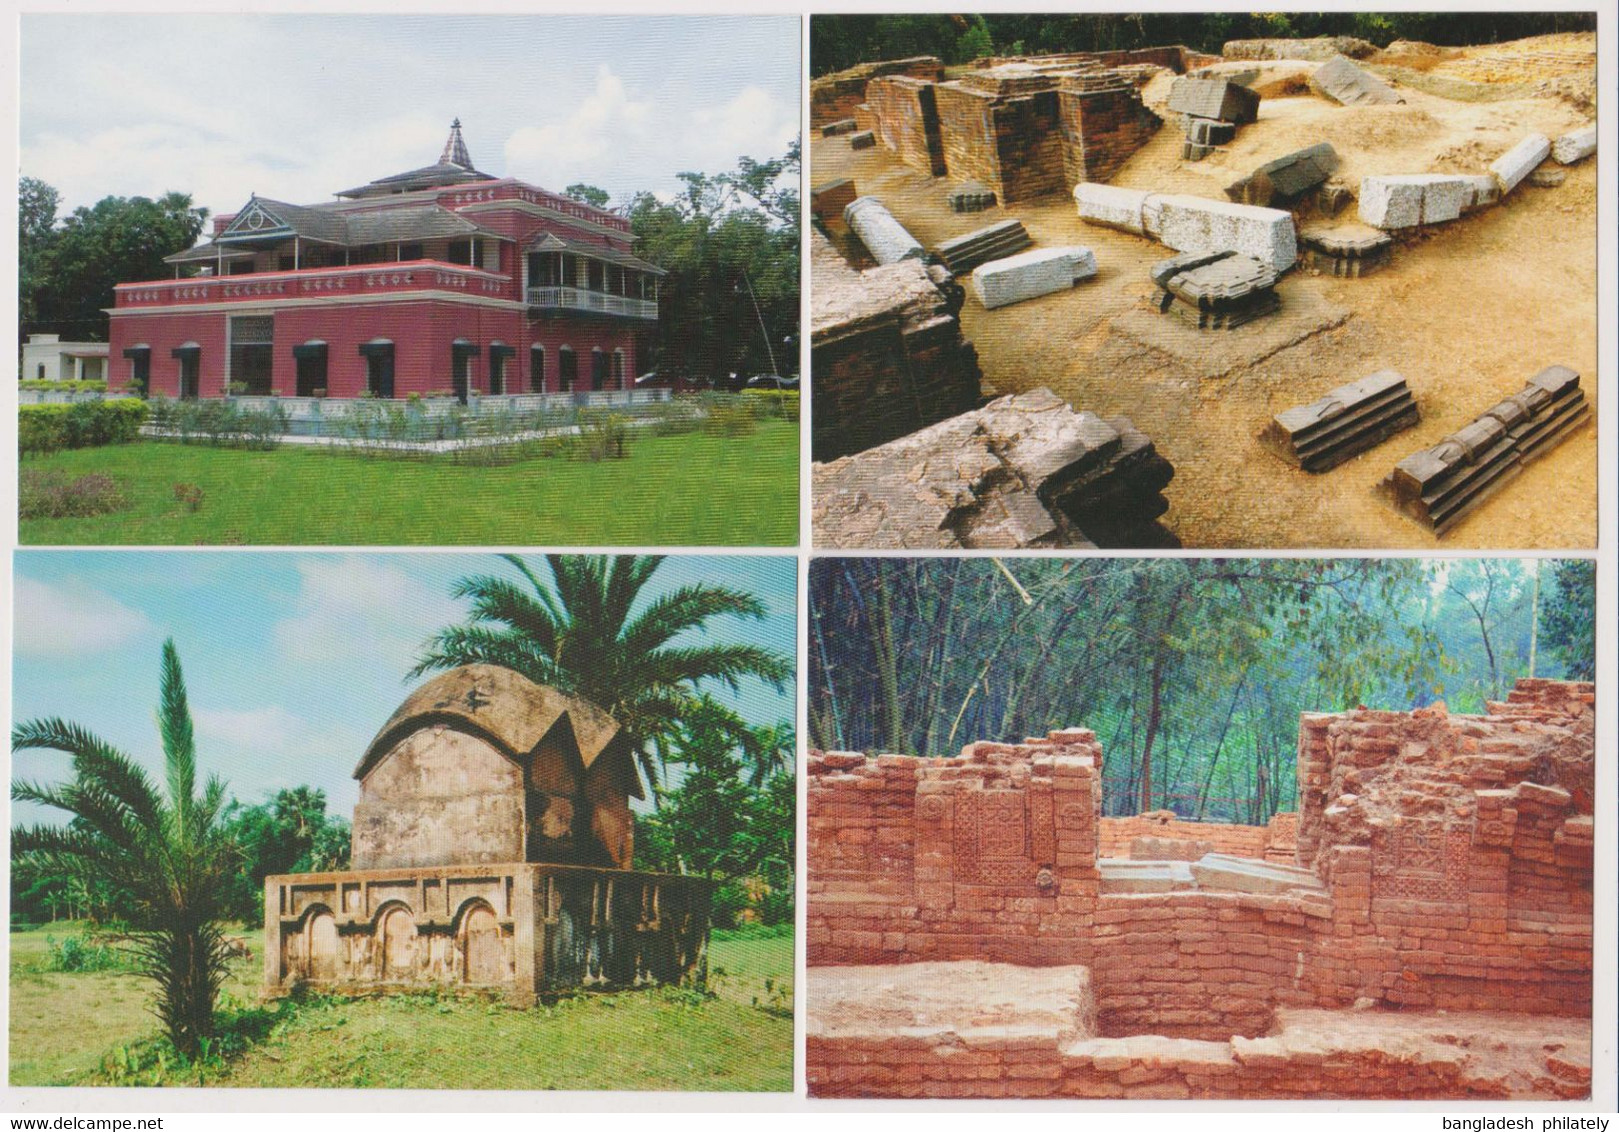 Bangladsh 2010 Commercial Use Complete Set of 30 Postcard by Govt Archeological Relics RARE Limited Print Mosque Nature